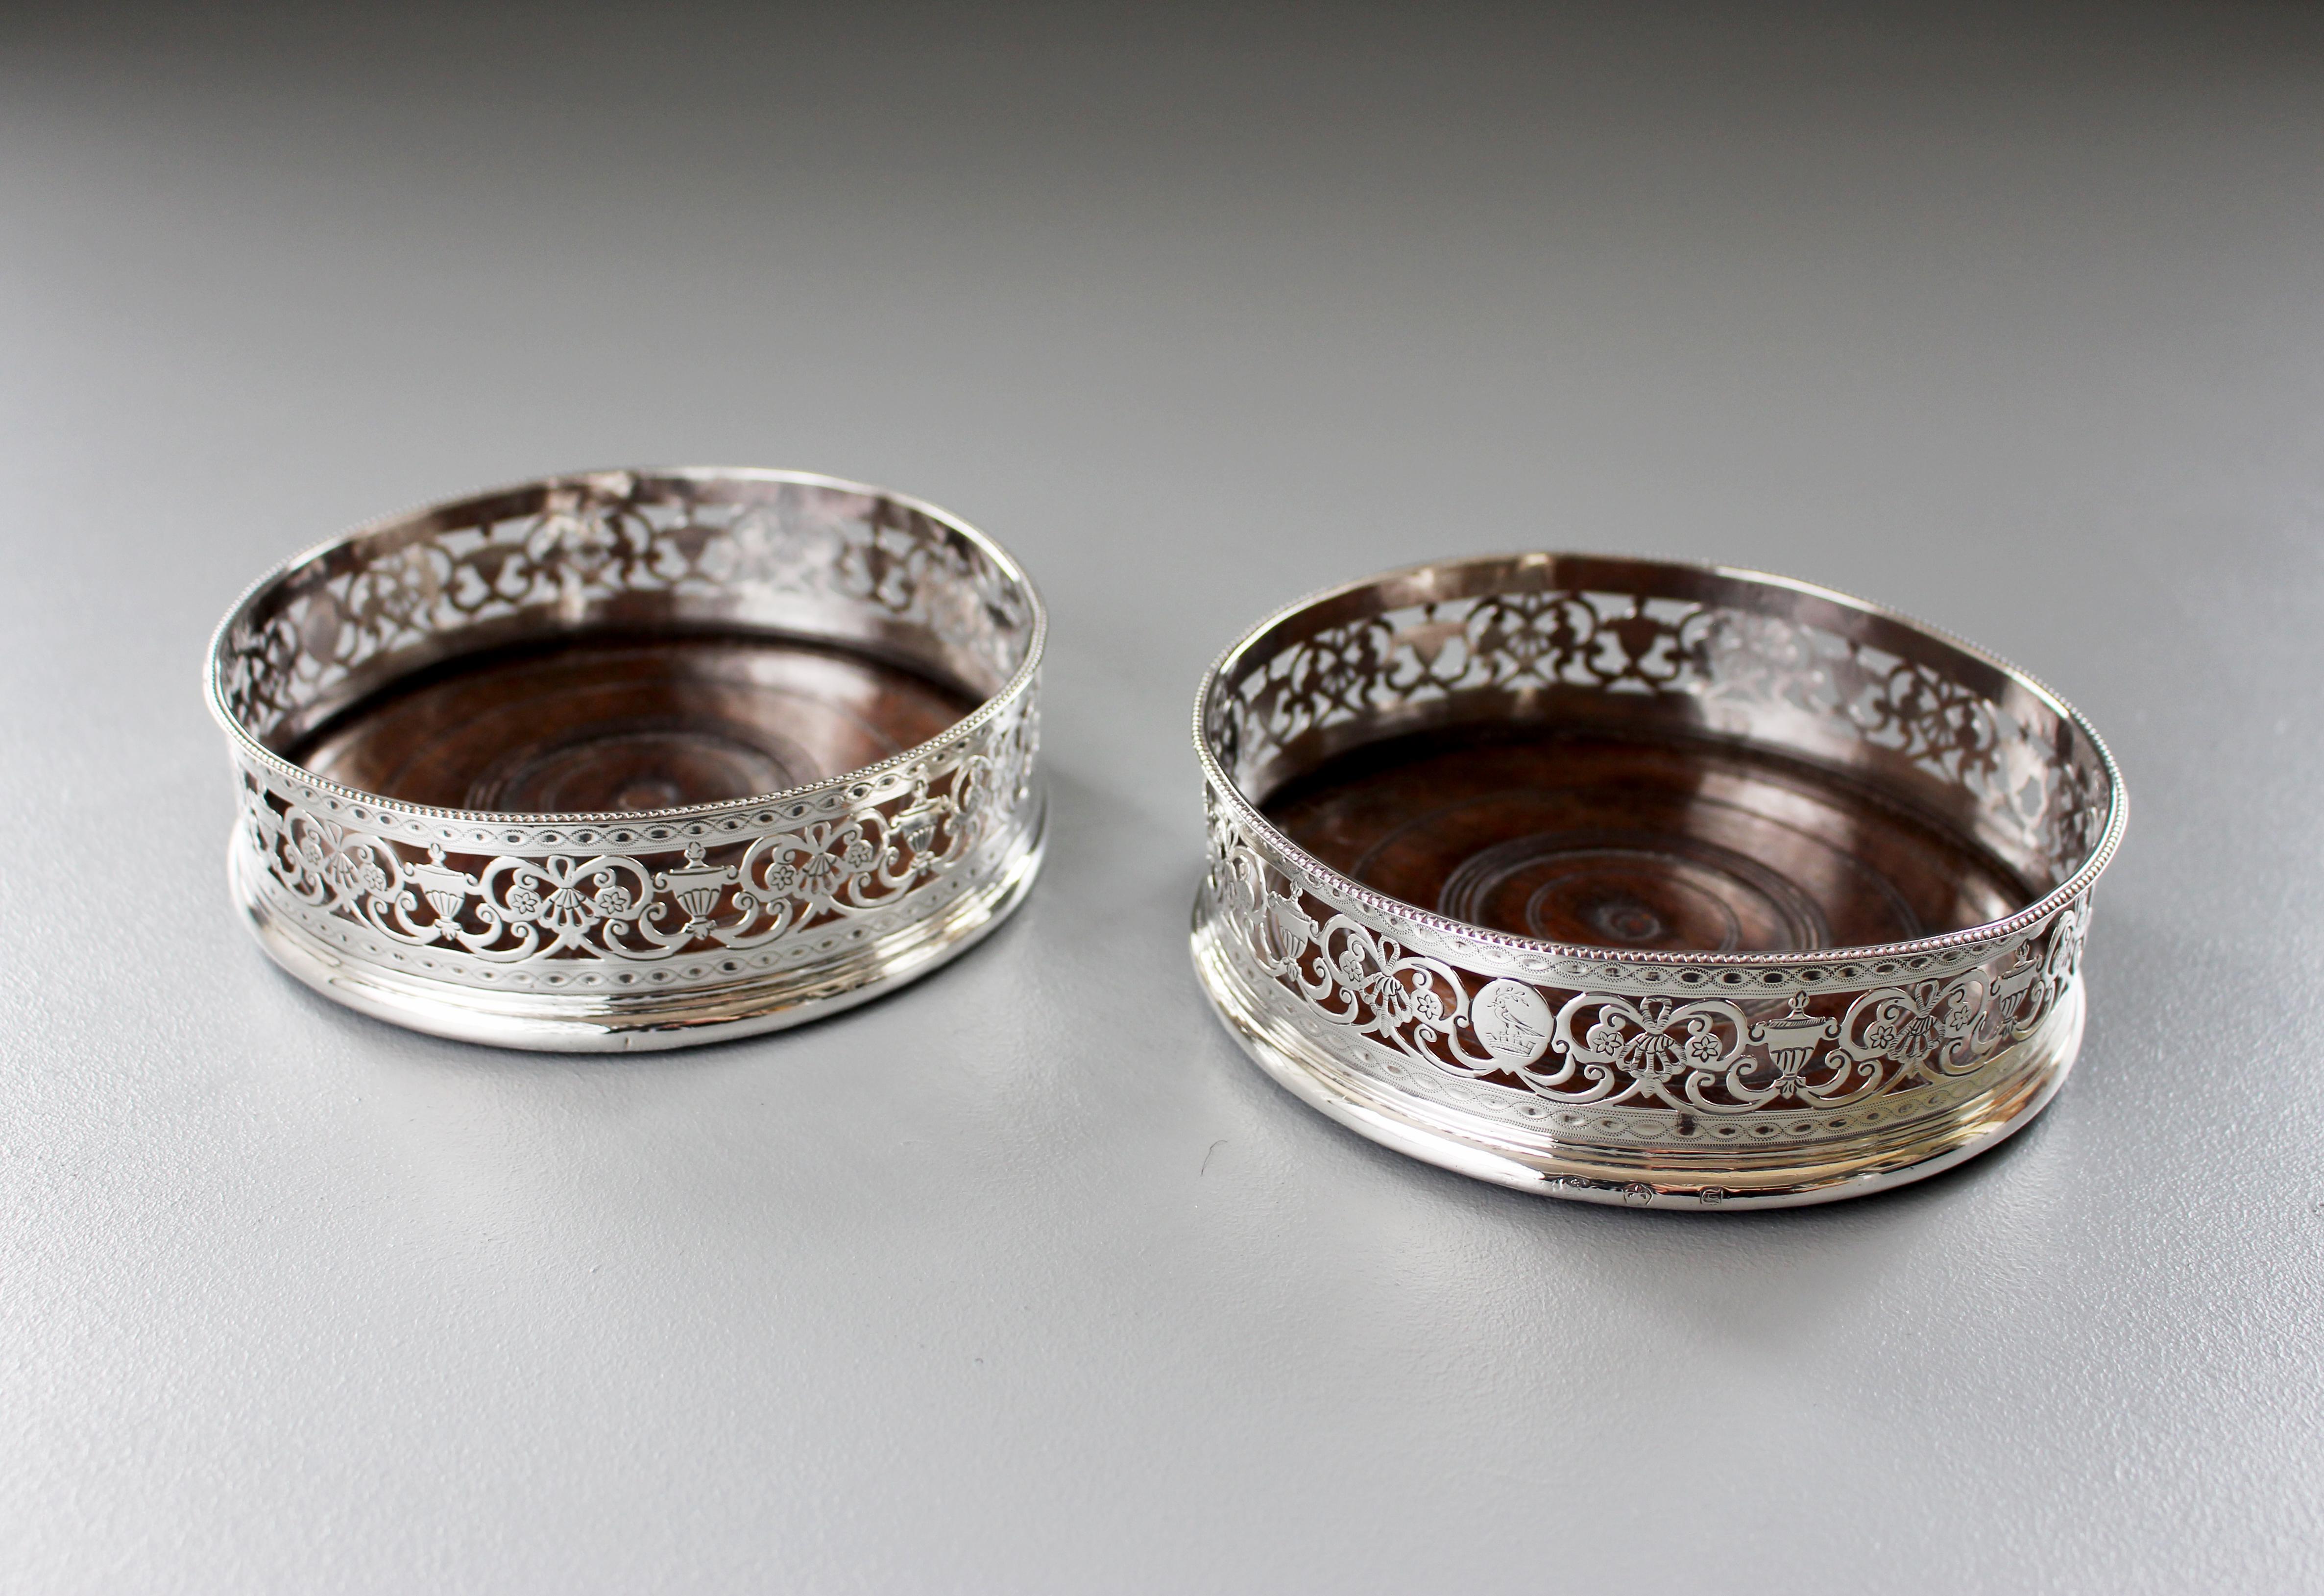 British 18th Century Pair of Silver Bottle Coasters by Richard Morton & Co.